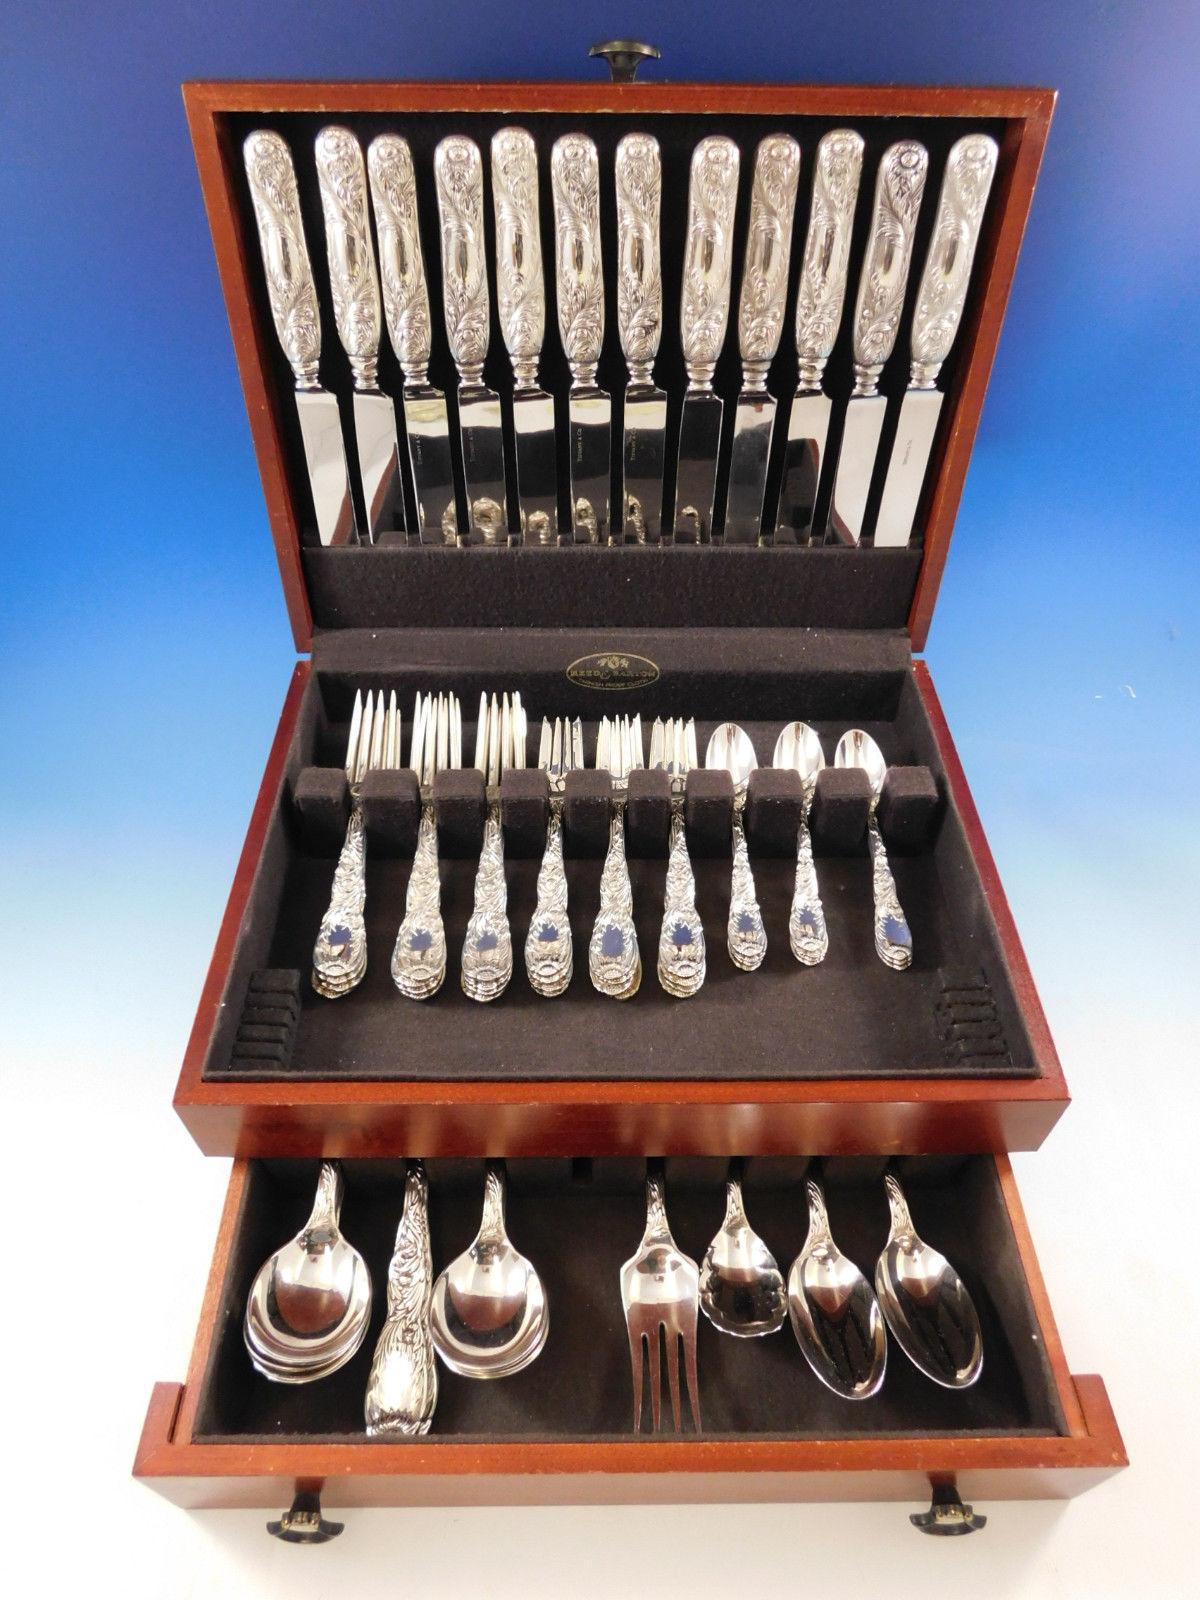 Superb dinner size Chrysanthemum by Tiffany & Co. sterling silver flatware set of 64 pieces. This set includes:

12 dinner size knives, 10 1/2